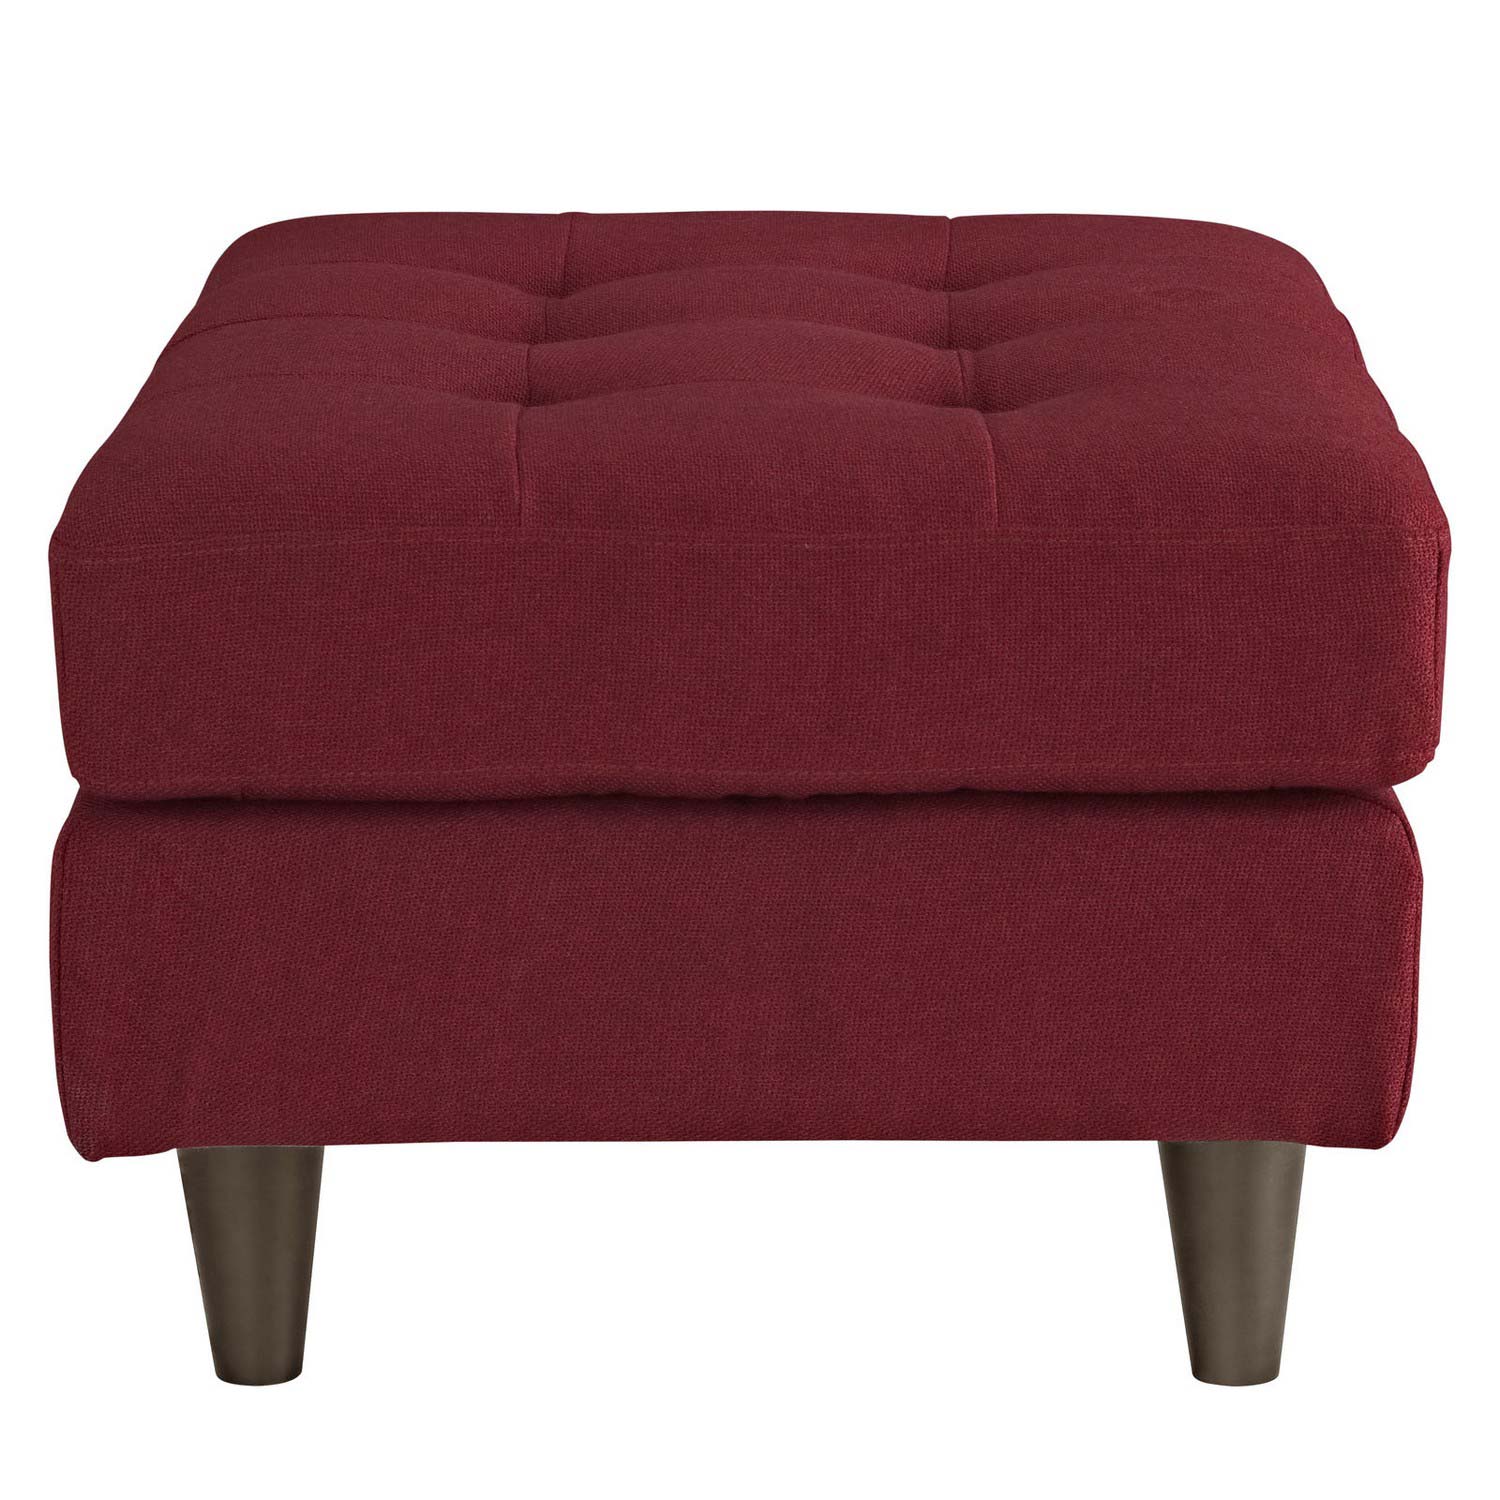 Modway Empress Upholstered Ottoman - Red